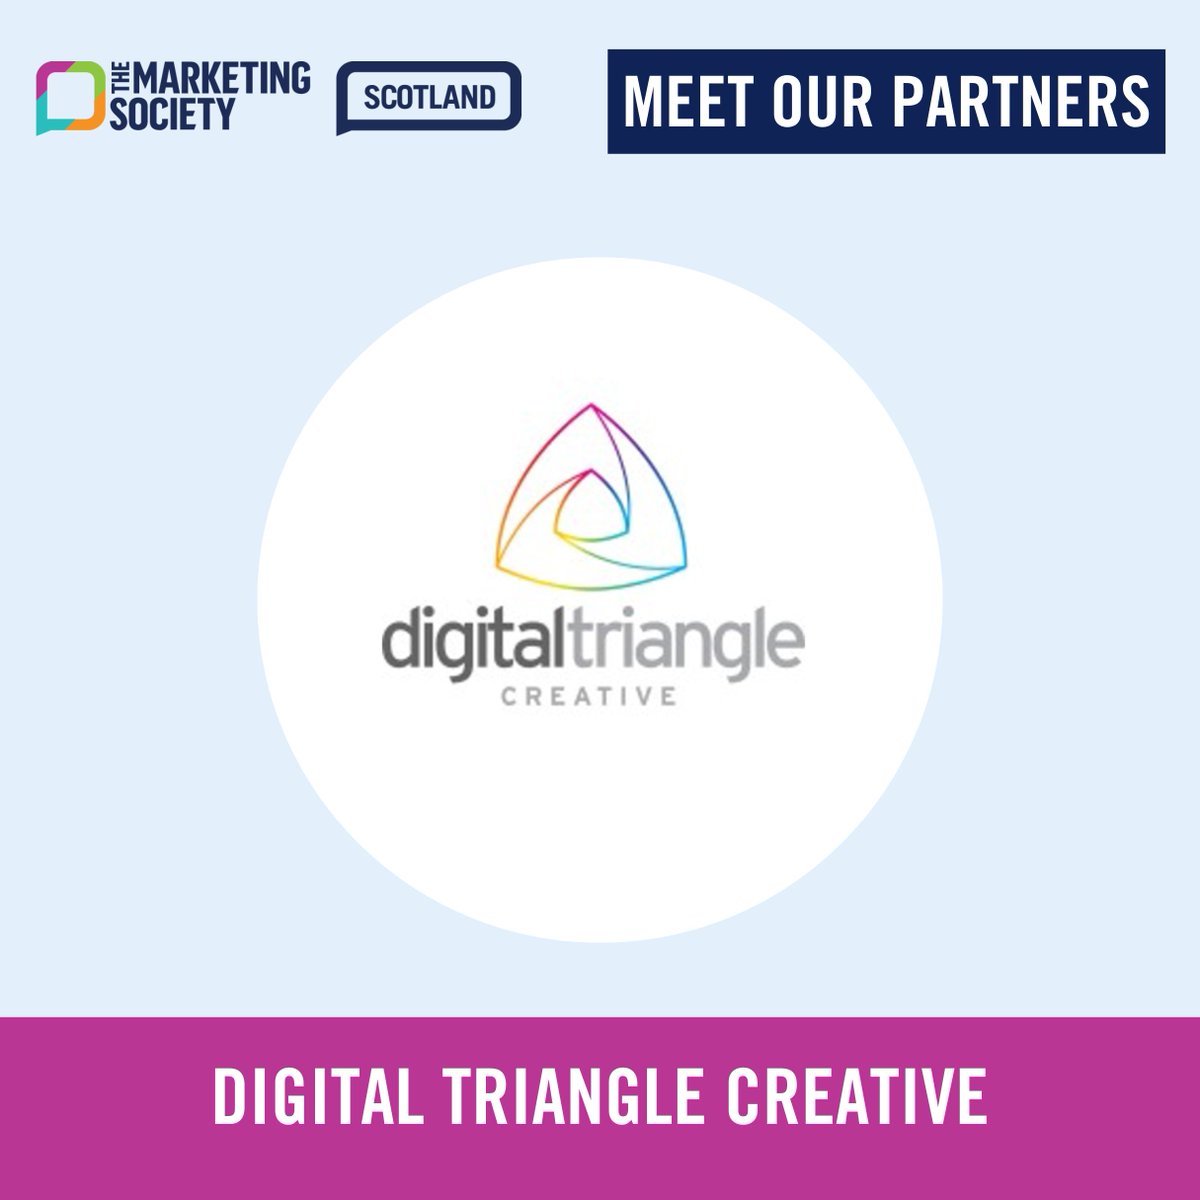 👋 Meet our partners @DigitalTriangle Creative are our long-term film and photography partner they capture and create content for all of The Marketing Society Scotland's flagship events. They work on numerous other fantastic projects, check them out: loom.ly/PzzhcMI